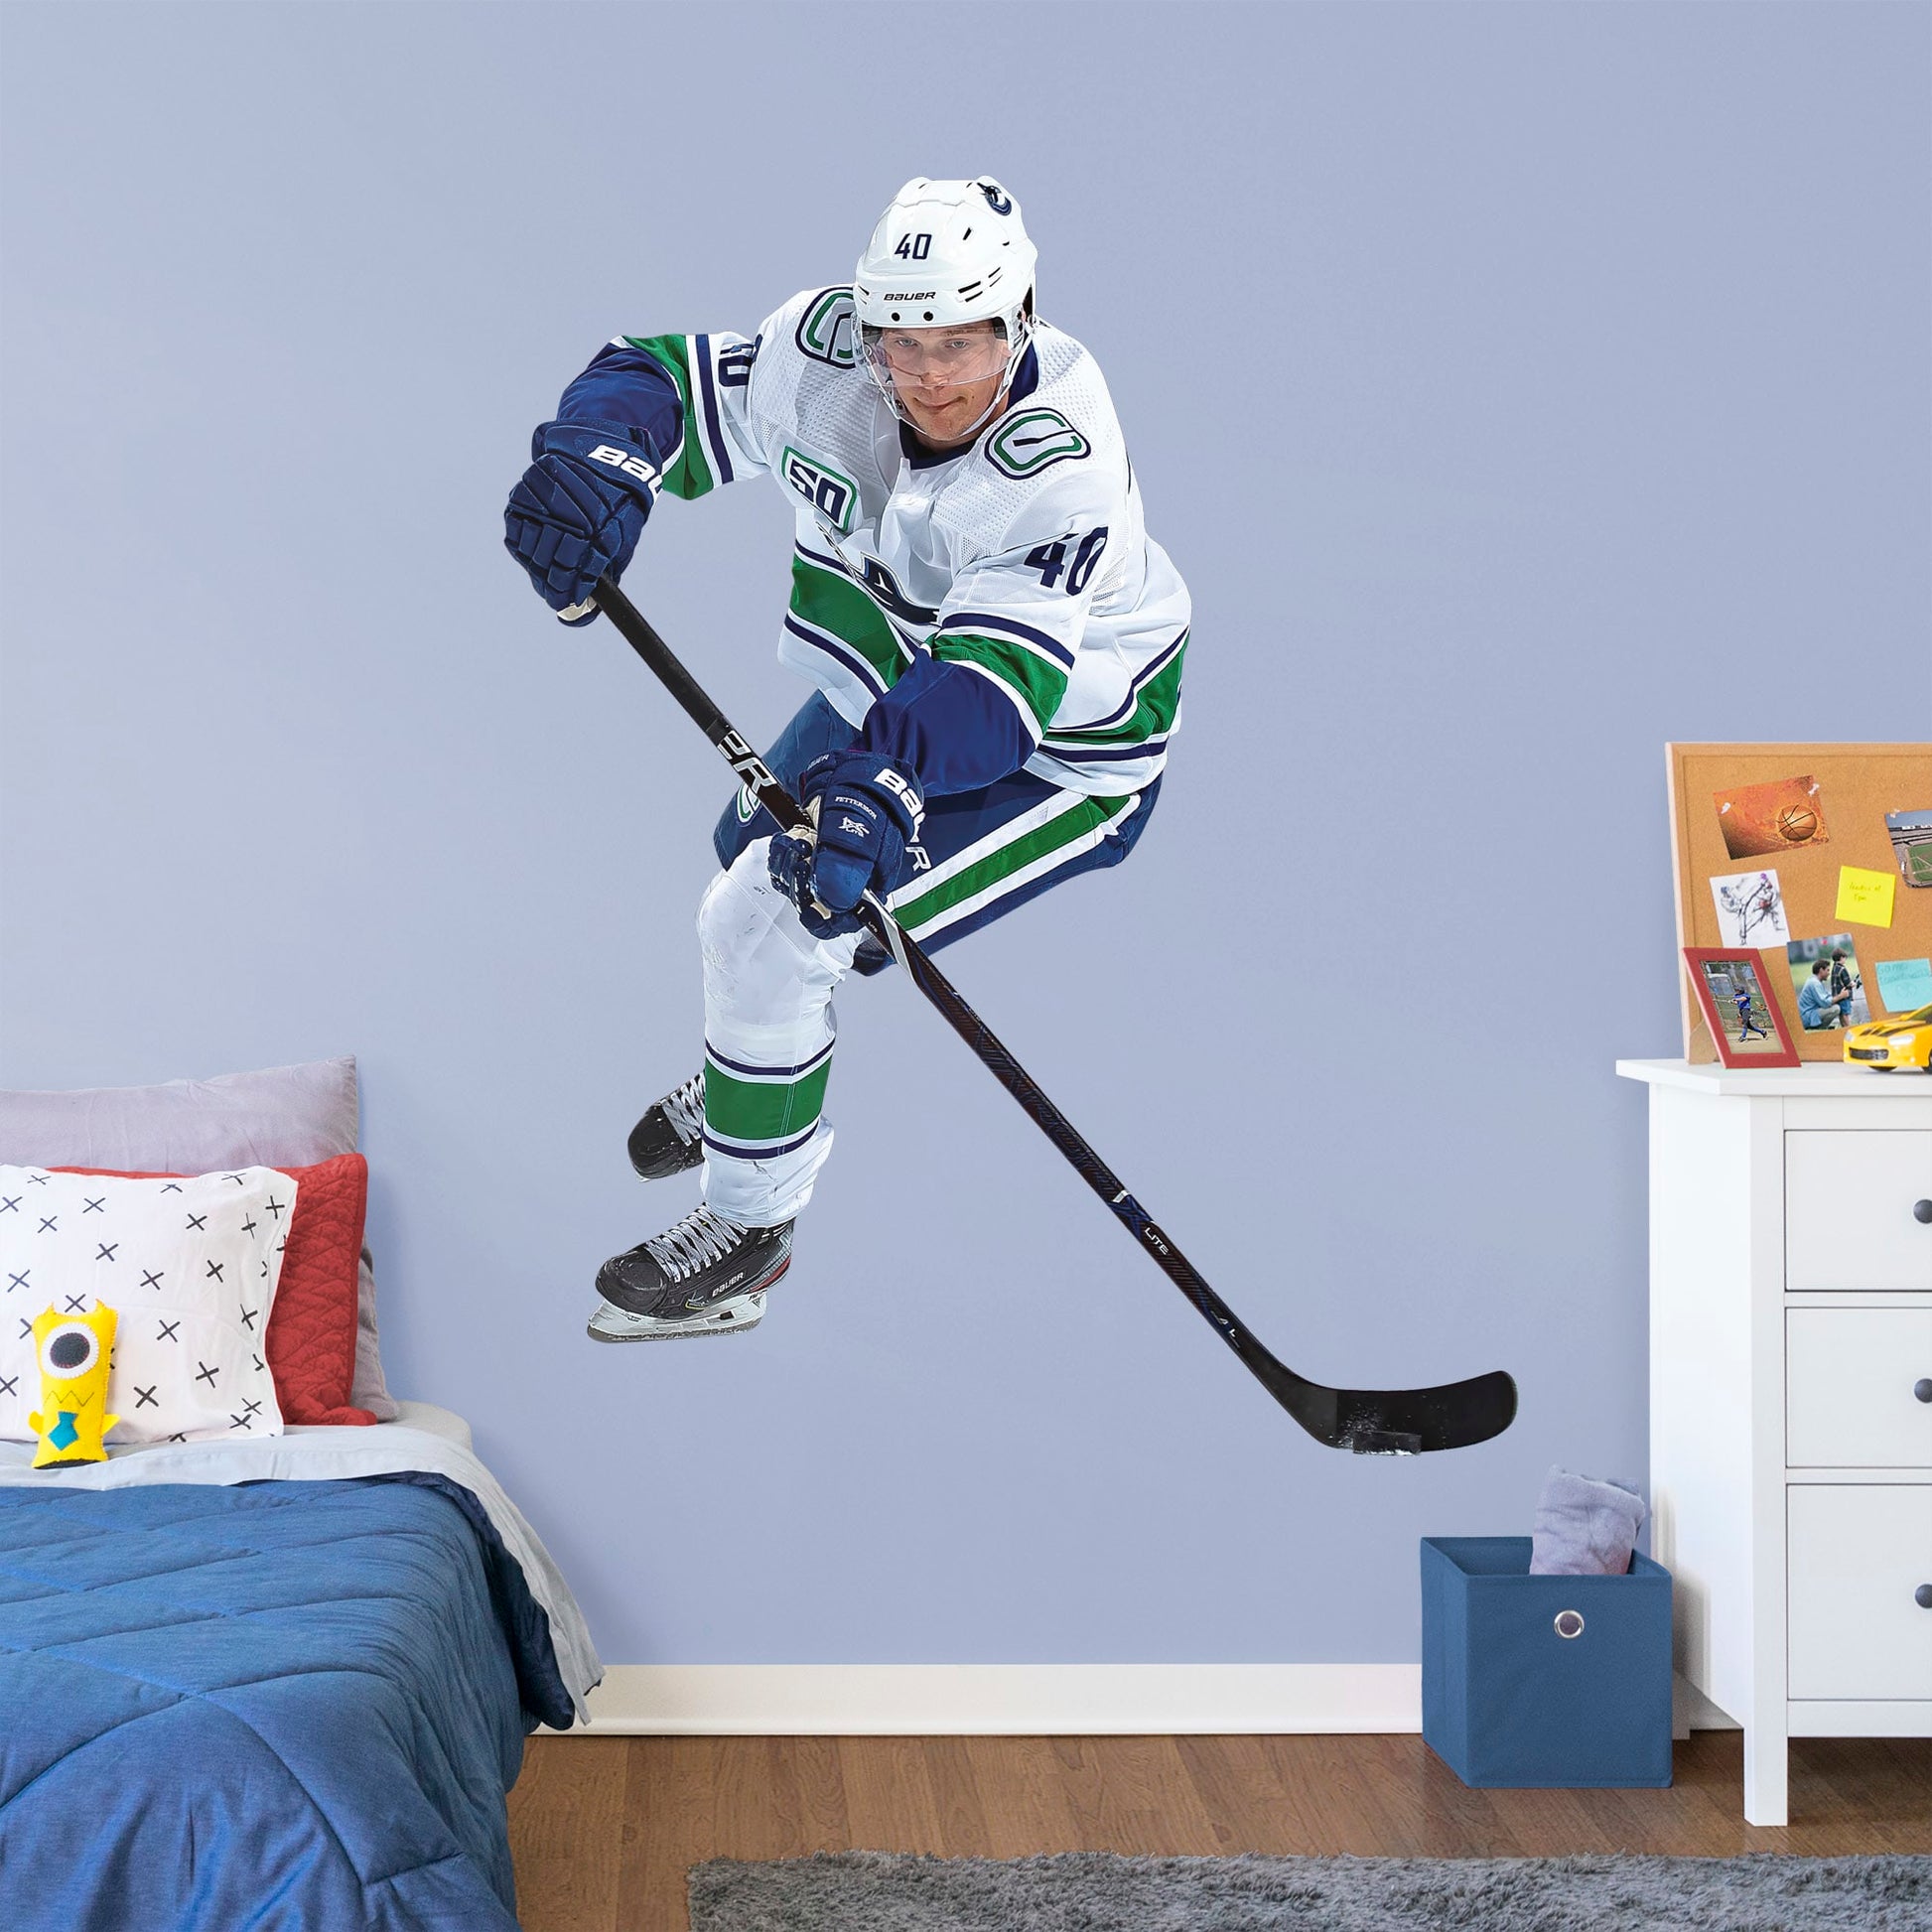 Life-Size Athlete + 2 Decals (61"W x 77"H) Elias Peterson has been a standout in the league since the very beginning, and now you can bring him to life in your own home with this Officially Licensed NHL Removable Wall Decal! Canucks fans and NHL fanatics alike will love this durable and high quality wall decal and, with the excitement it brings to your space, it's almost as good as being at Rogers Arena!